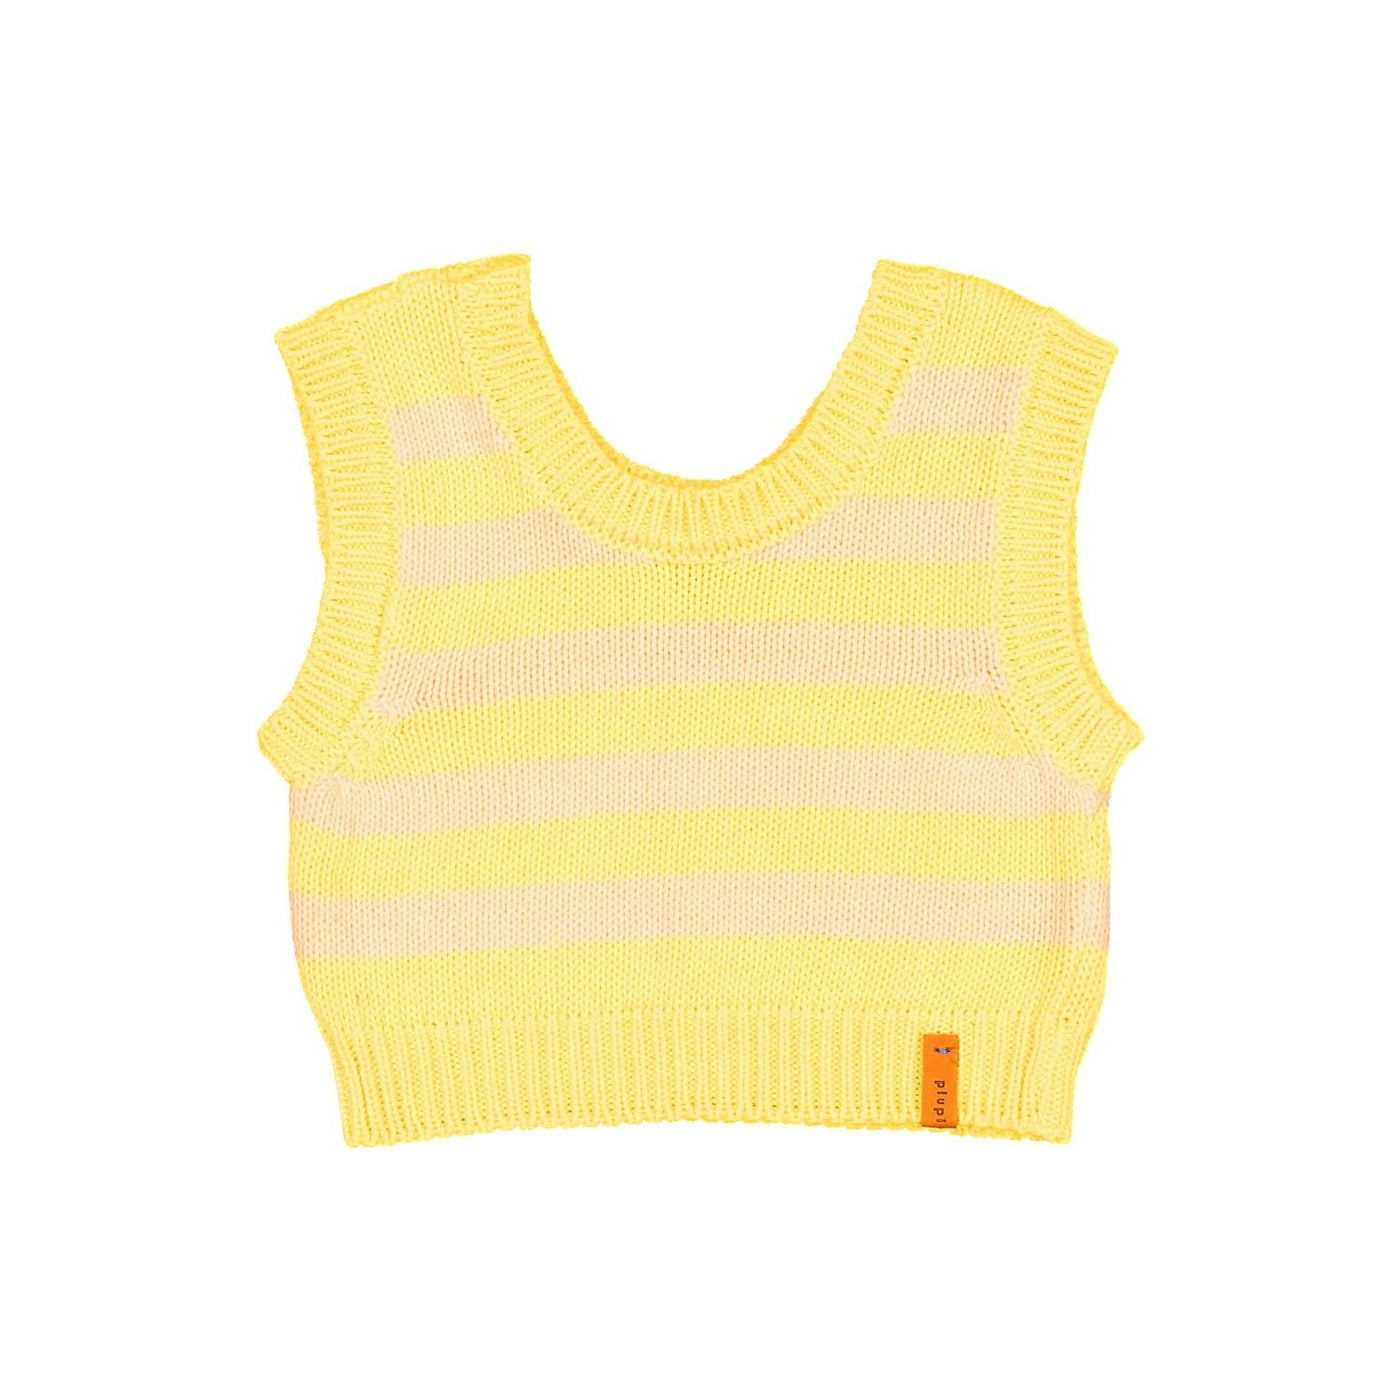 Yellow and Salmon Knitted Top by Piupiuchick - Petite Belle